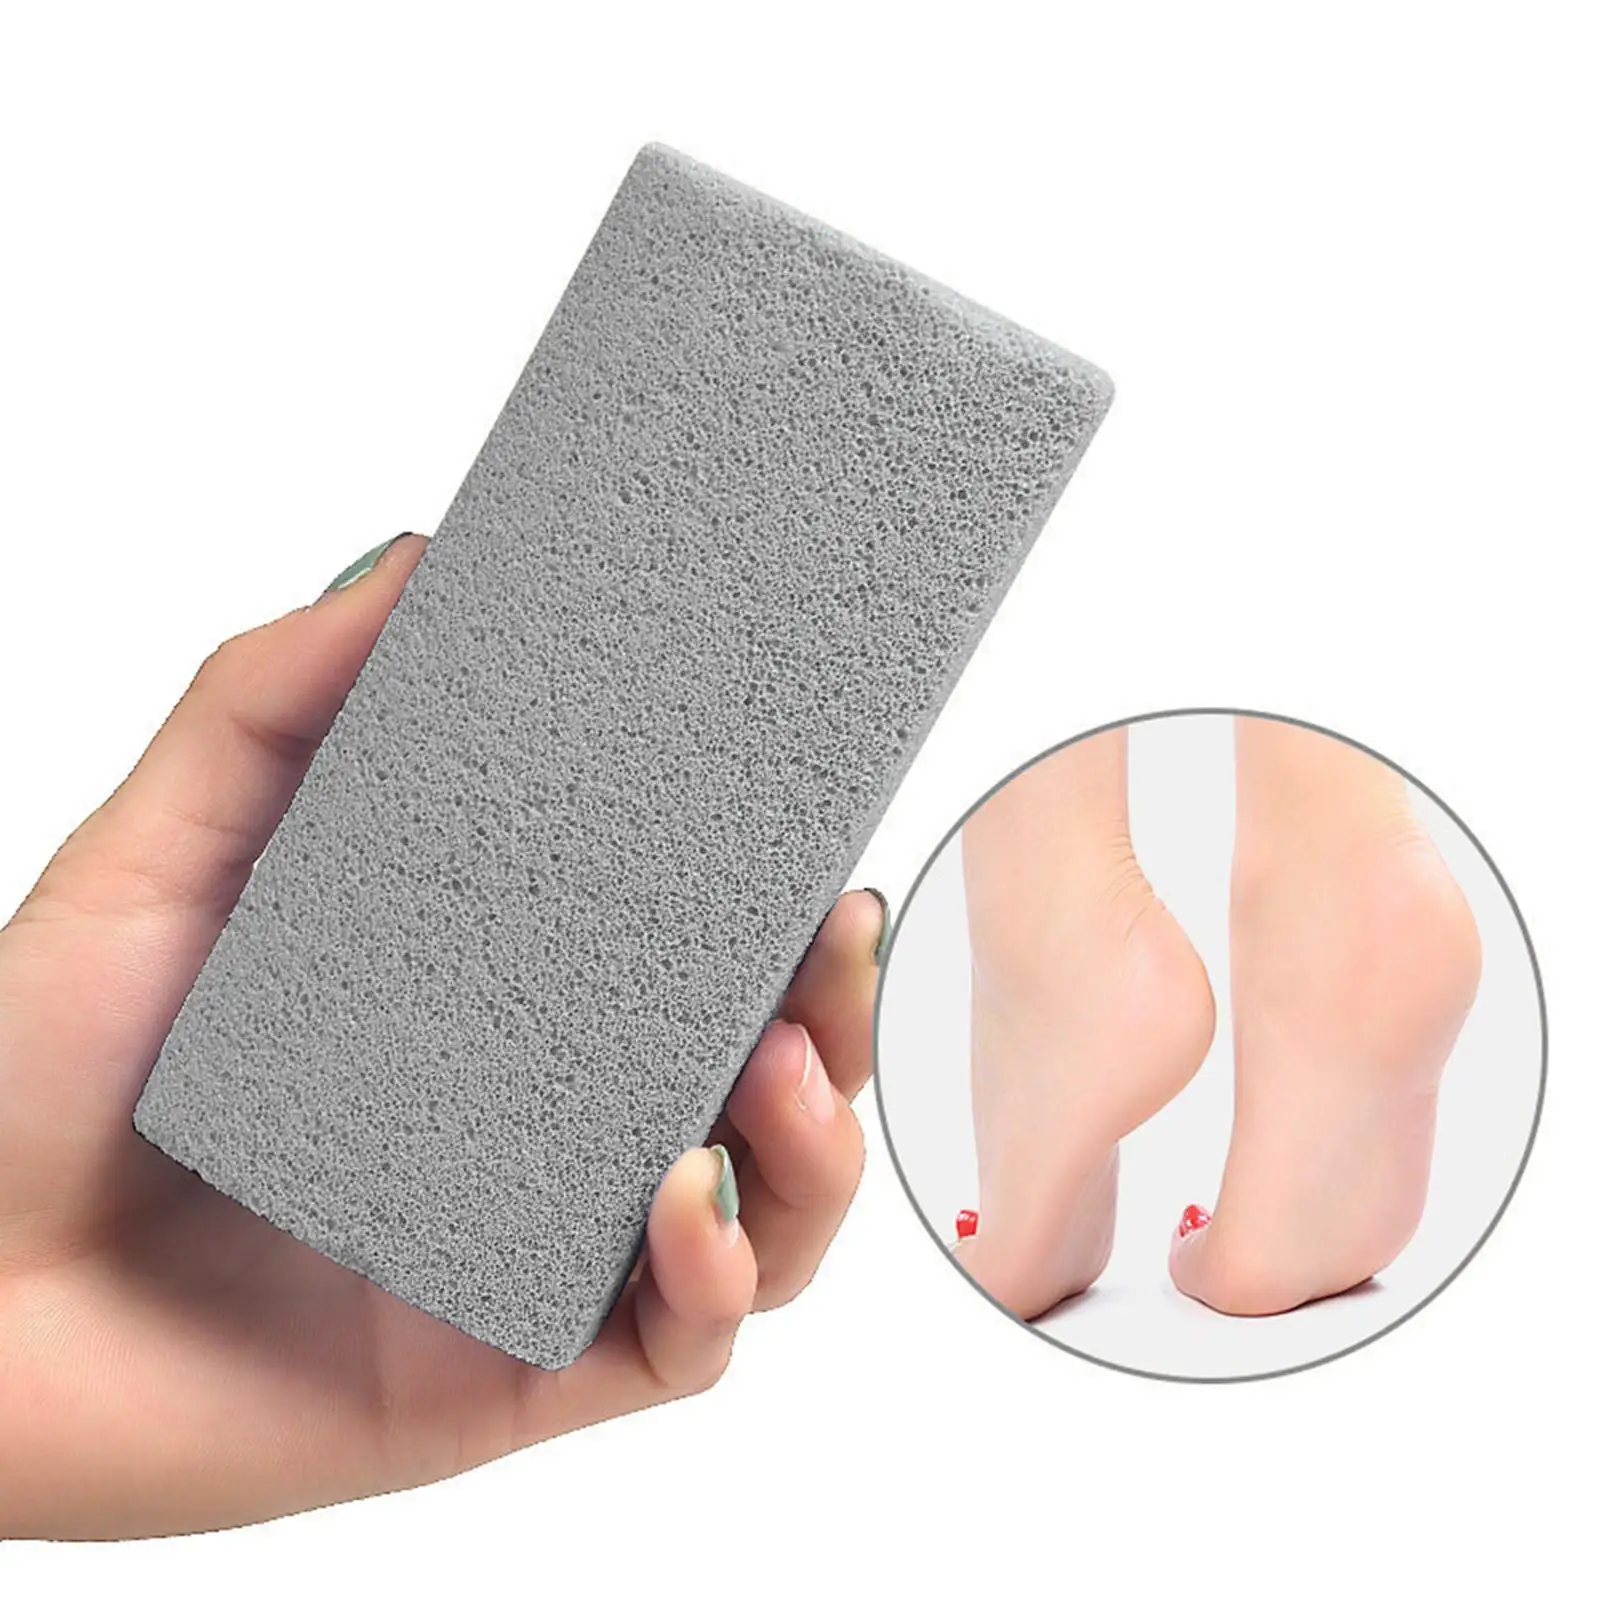 Double Sided Cuboid Foot Pumice Stones Foam Callus Remover Foot Scrubber for Dead Hard Skin Daily Use Cracked Heels Foot Sole